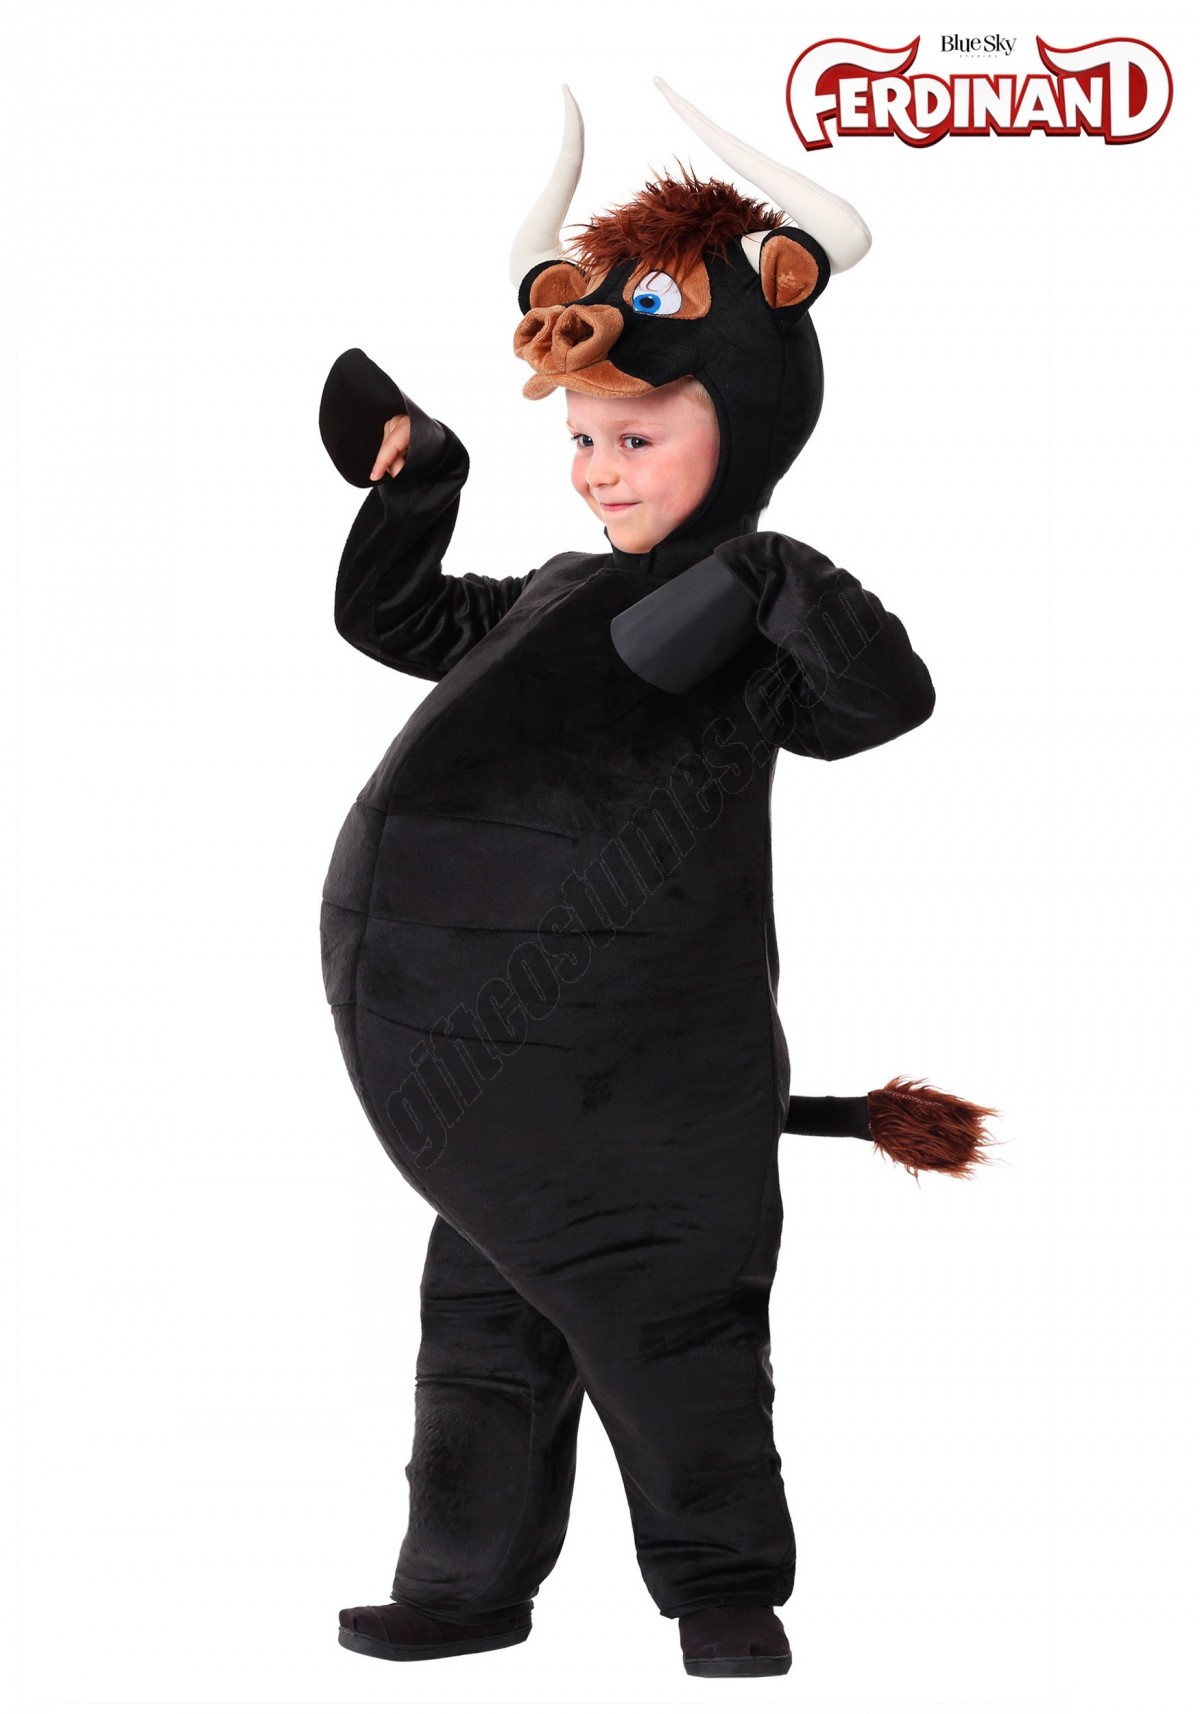 Ferdinand Bull Costume for Toddlers Promotions - -0